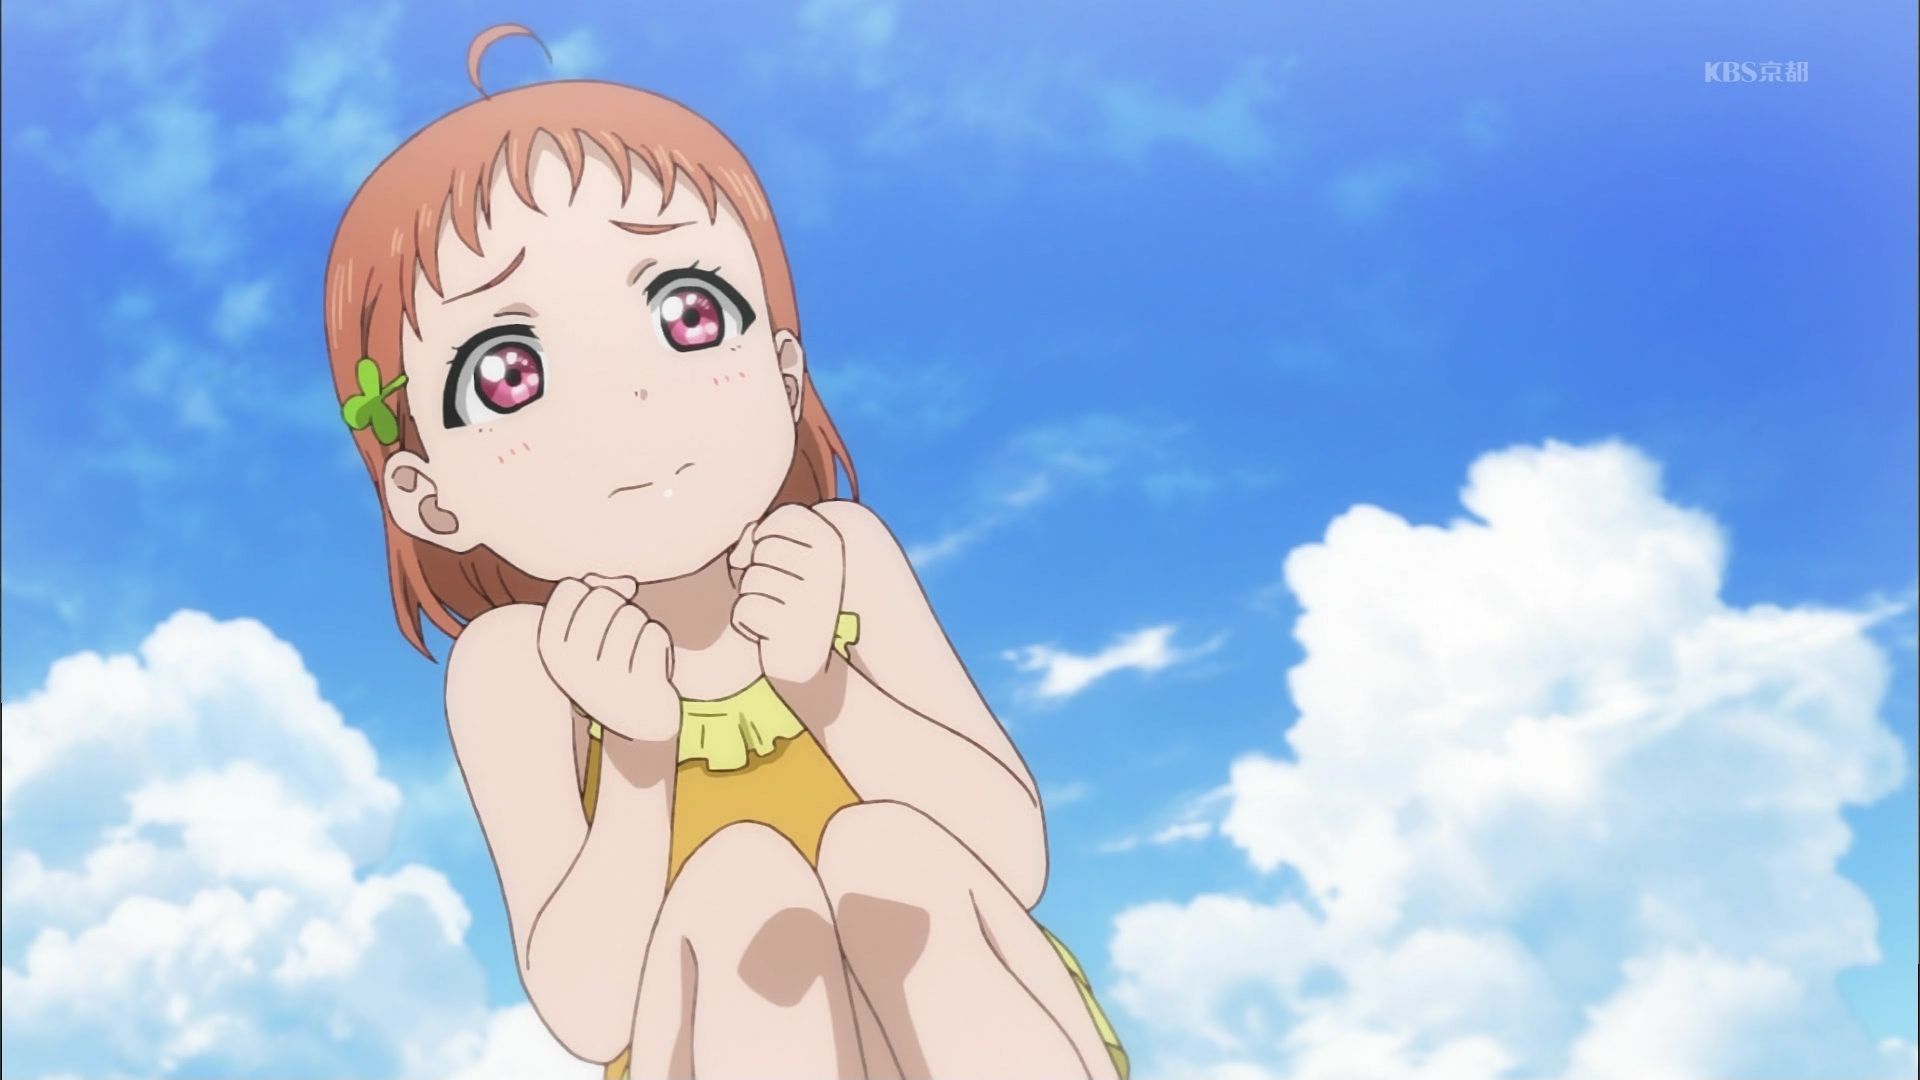 [God images] "love live! "If you see a loli age of members to be happy too, Lori live's tummy! And shout from wwwwww 16